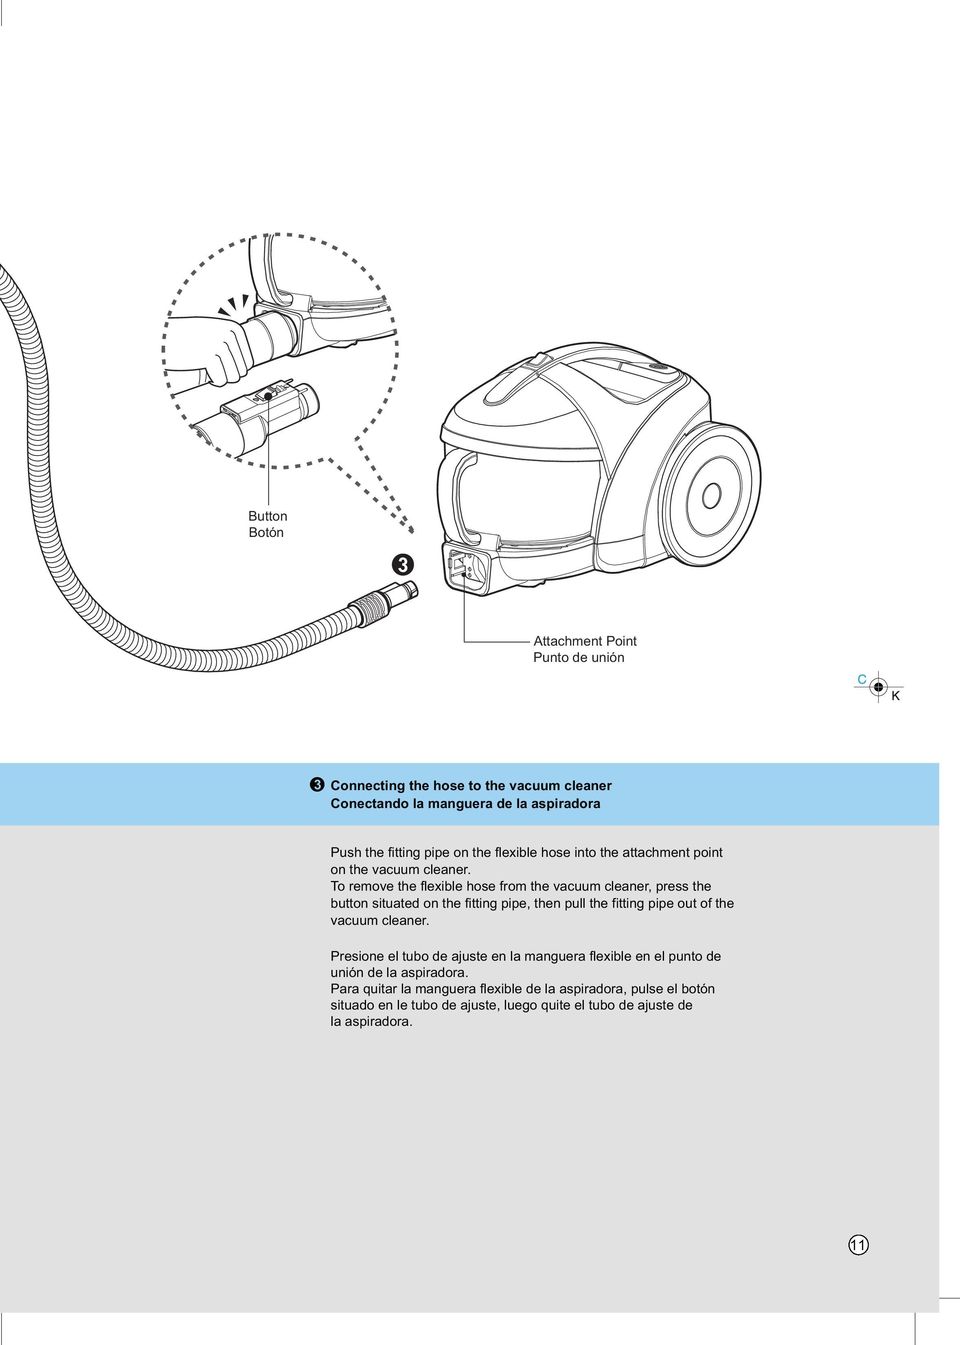 To remove the flexible hose from the vacuum cleaner, press the button situated on the fitting pipe, then pull the fitting pipe out of the vacuum cleaner.